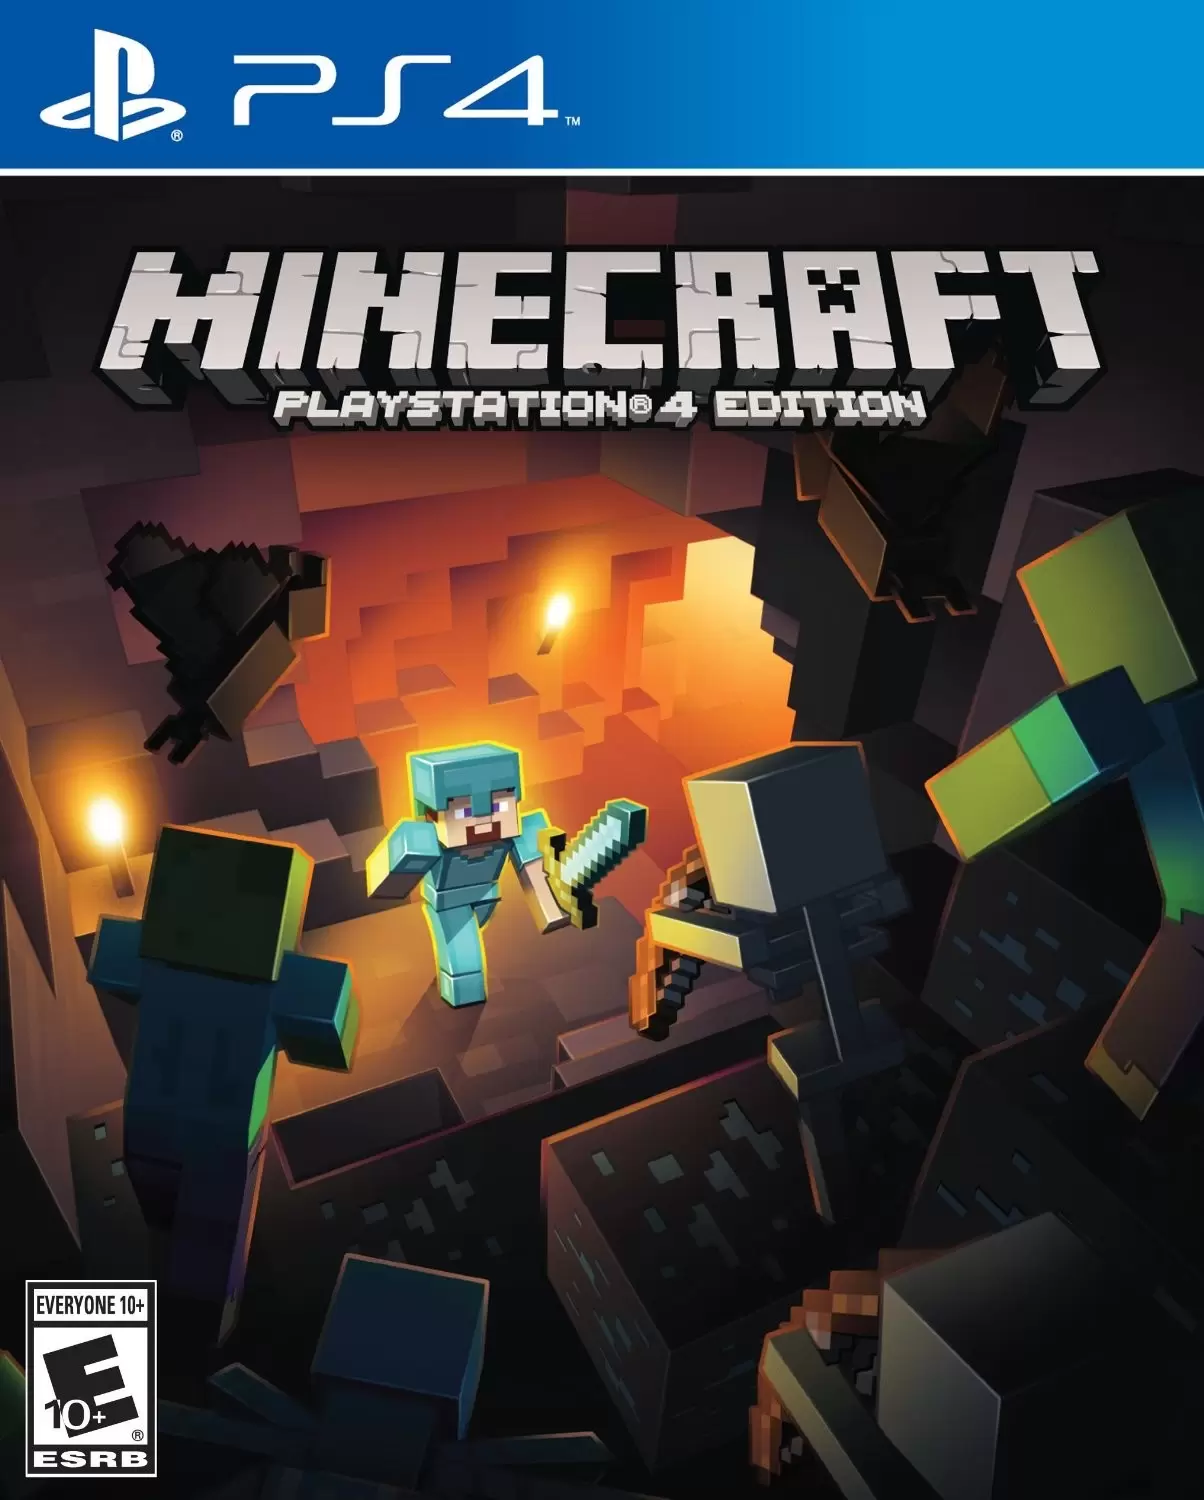 PS4 Games - Minecraft: PlayStation 4 Edition